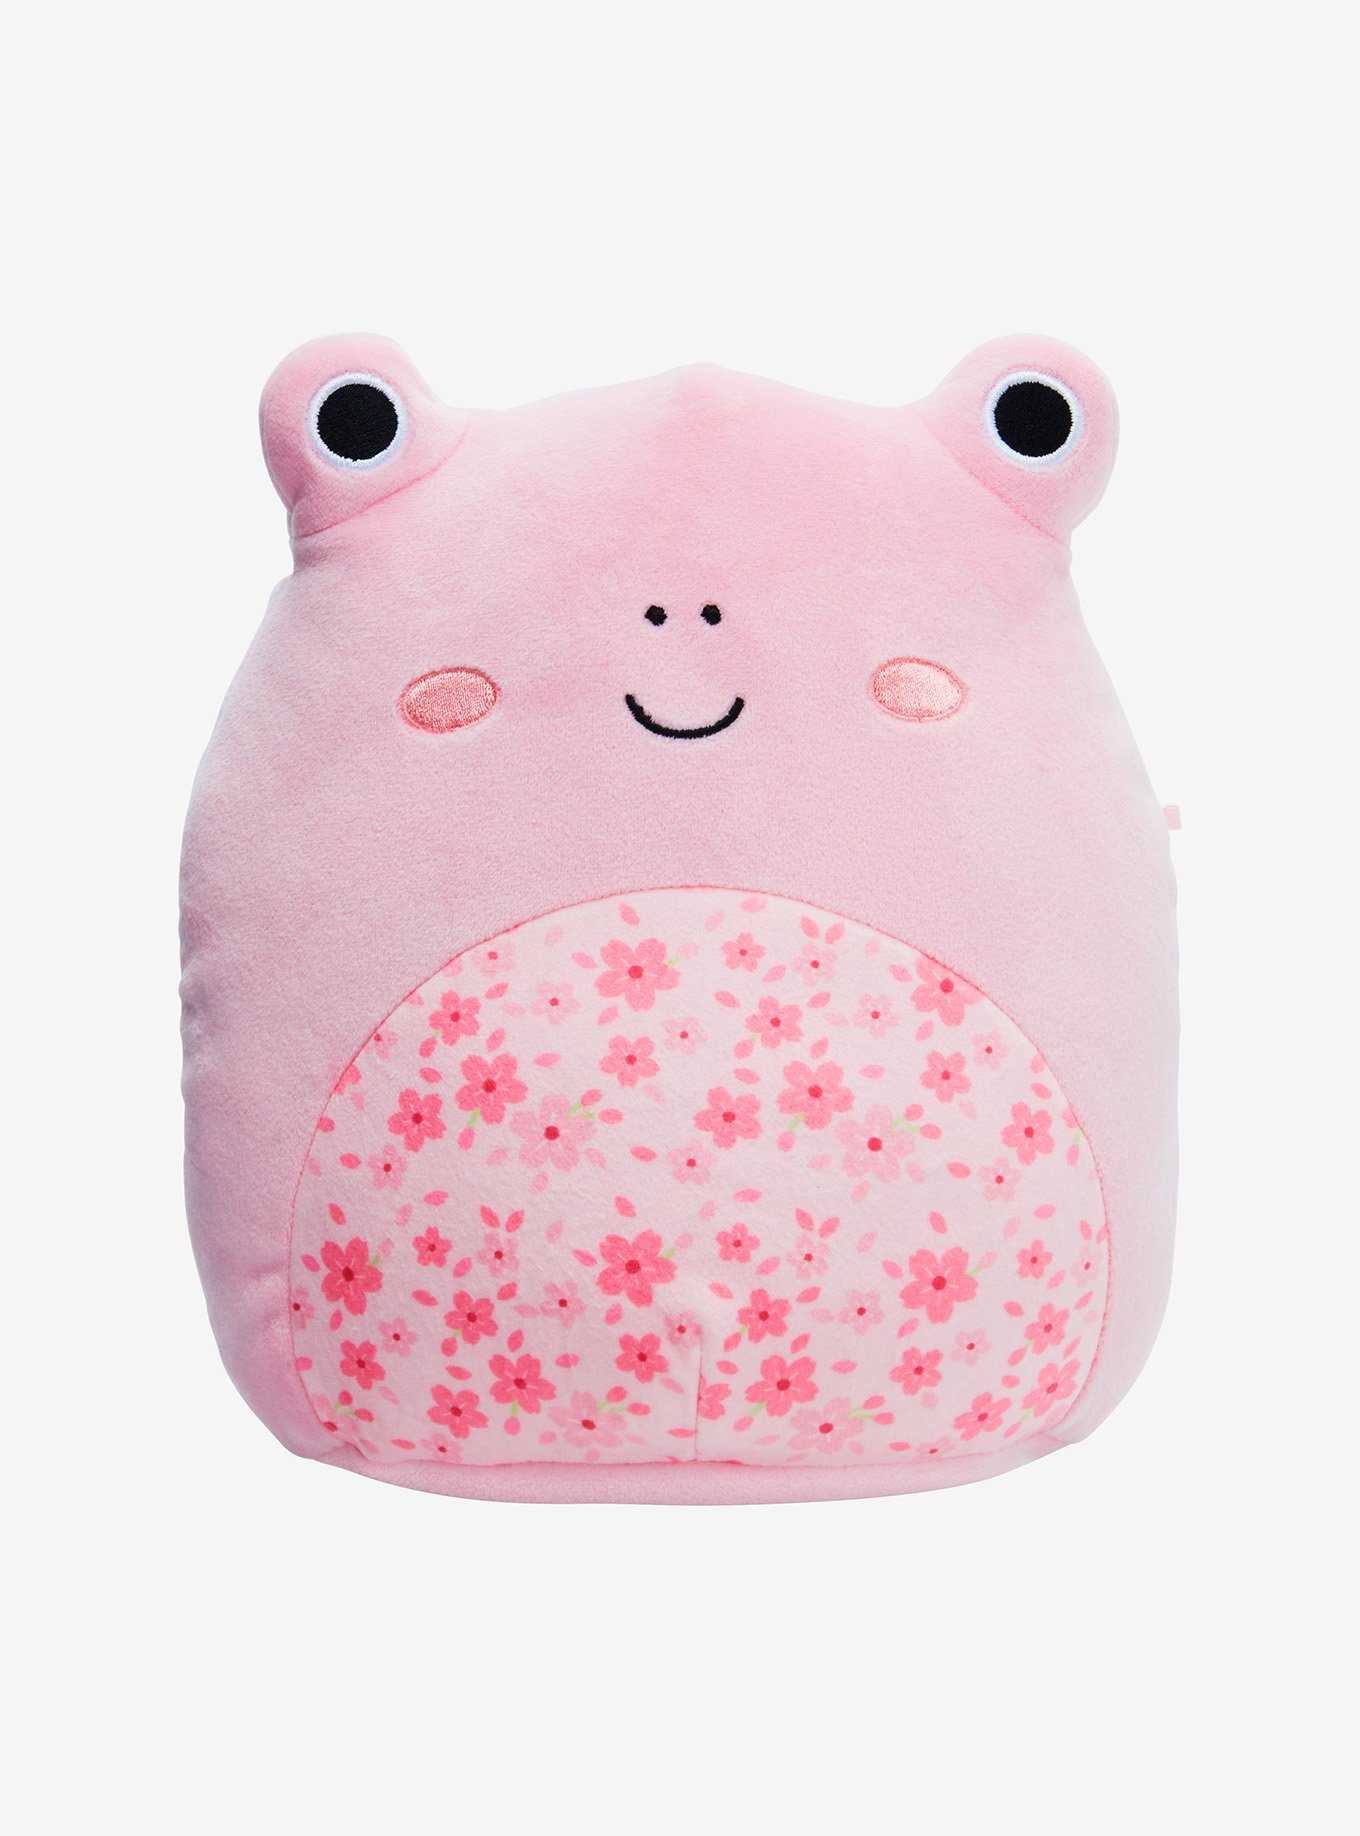 OFFICIAL Frog Squishmallow Plushes